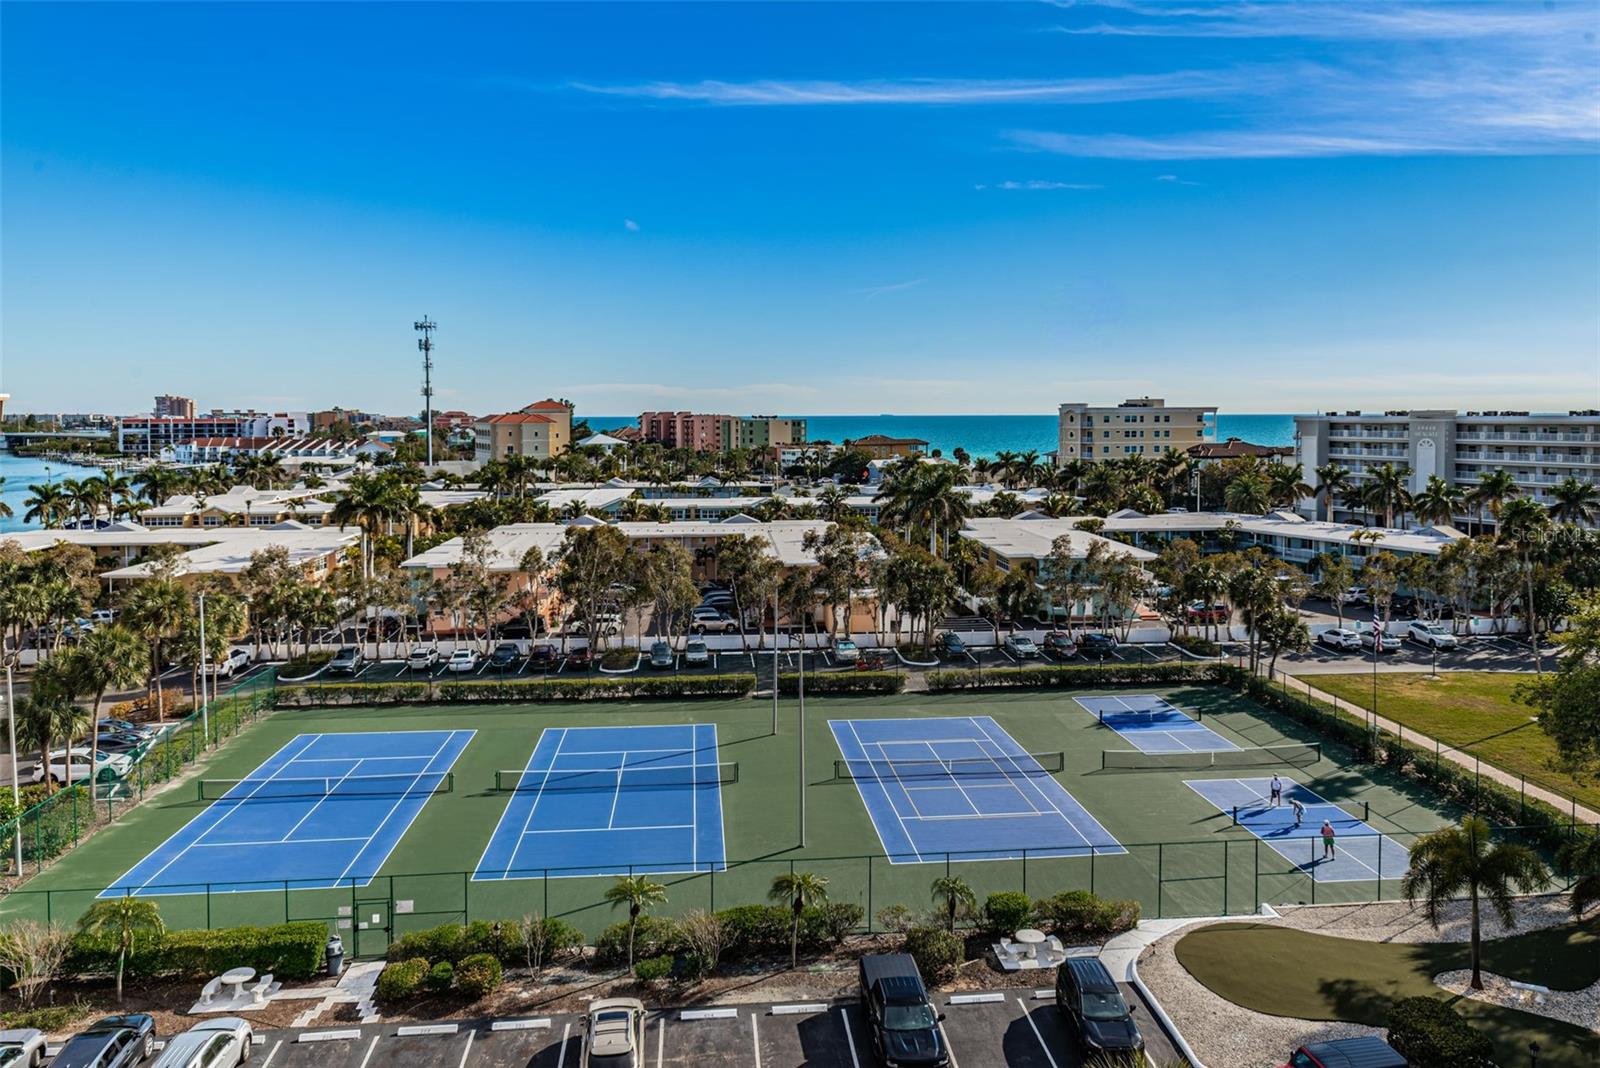 View of the Newly refurbished Tennis & Pickleball Courts off the front balcony